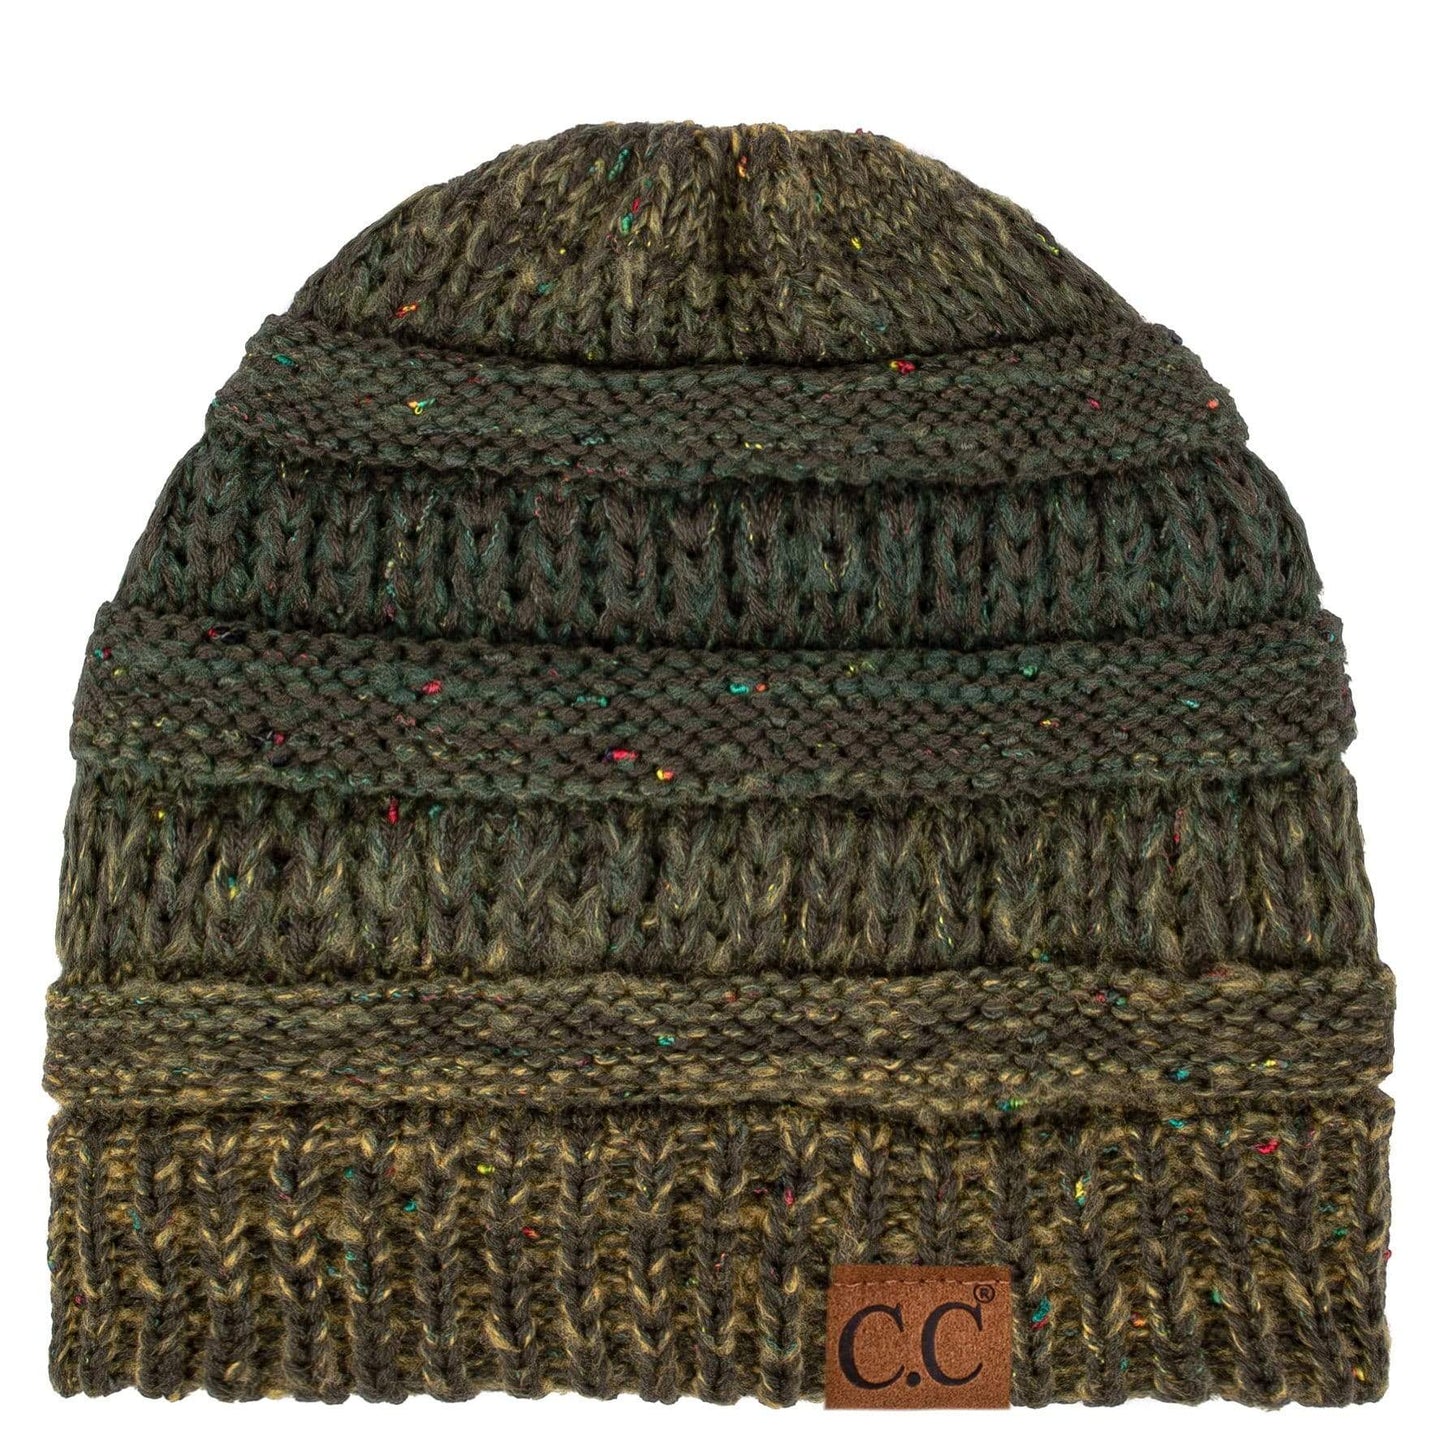 C.C Apparel Ombre Olive C.C Trendy Warm Chunky Soft Stretch Ombre Cable Knit Beanie Skully